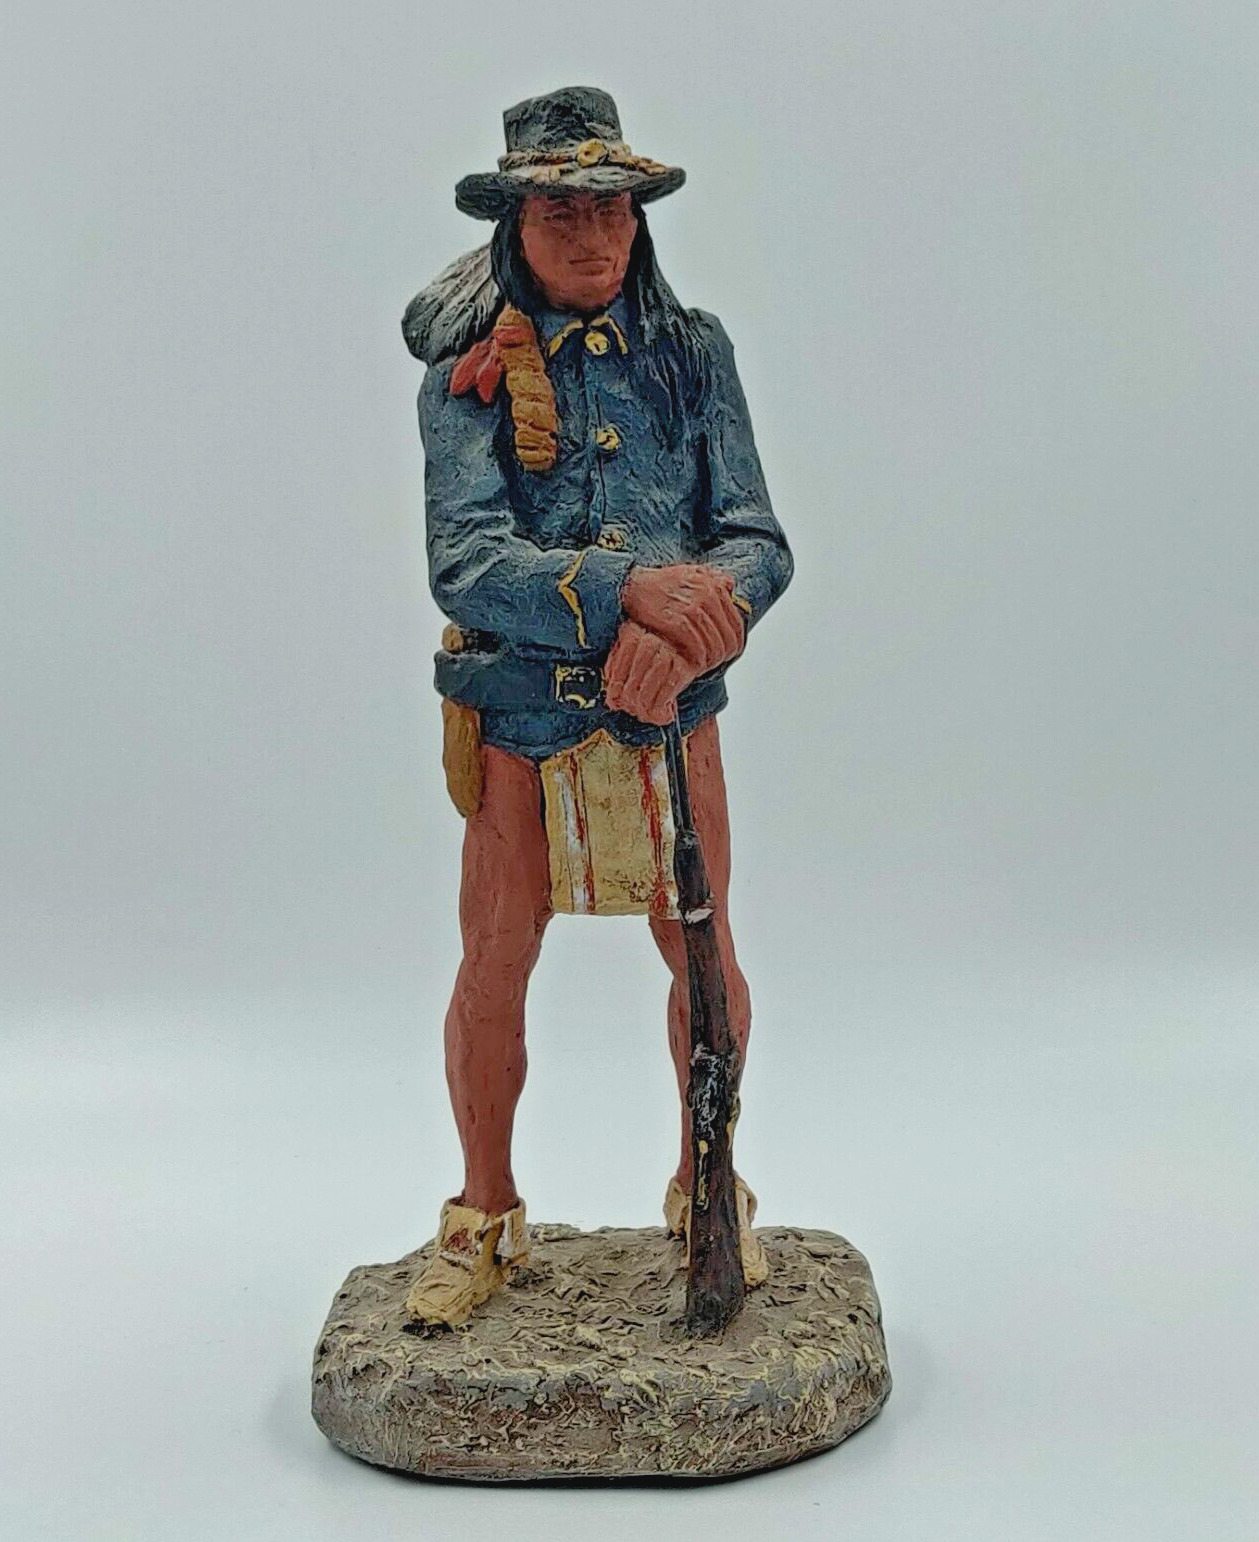 Daniel Monfort Native American Union Soldier Sculpture Signed And Dated 1986